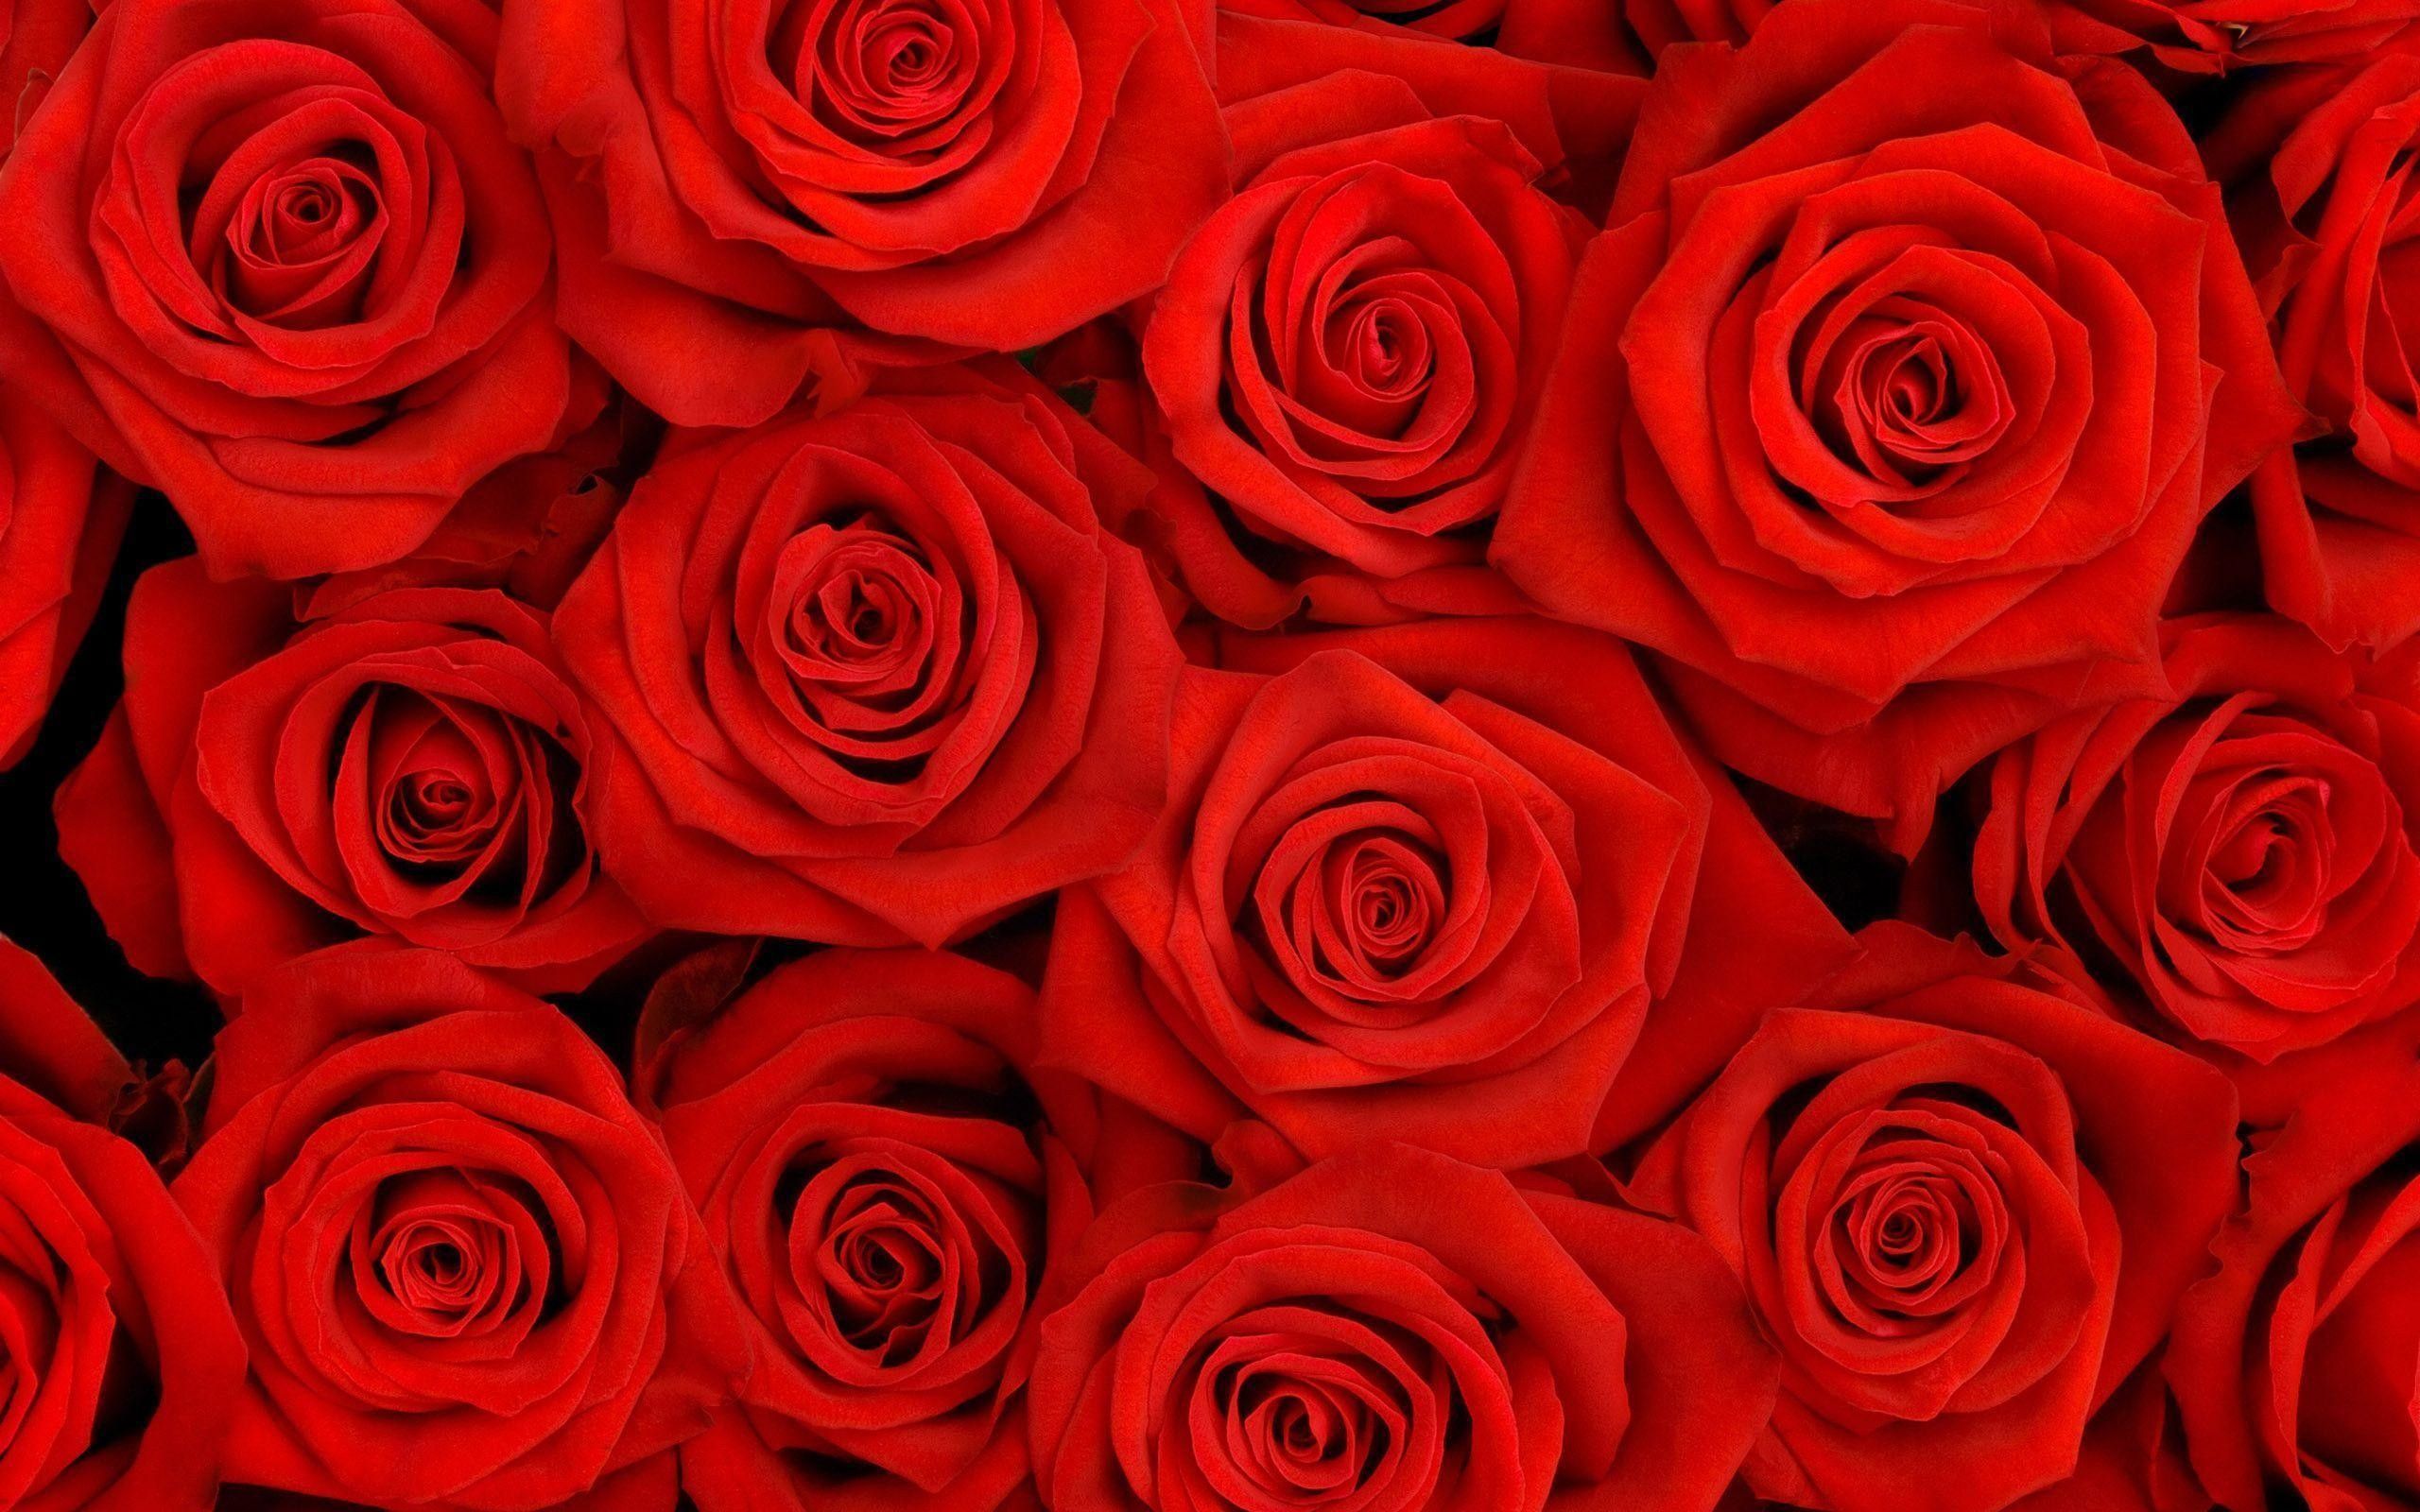 Red Roses Wallpaper Free Red .wallpaperaccess.com